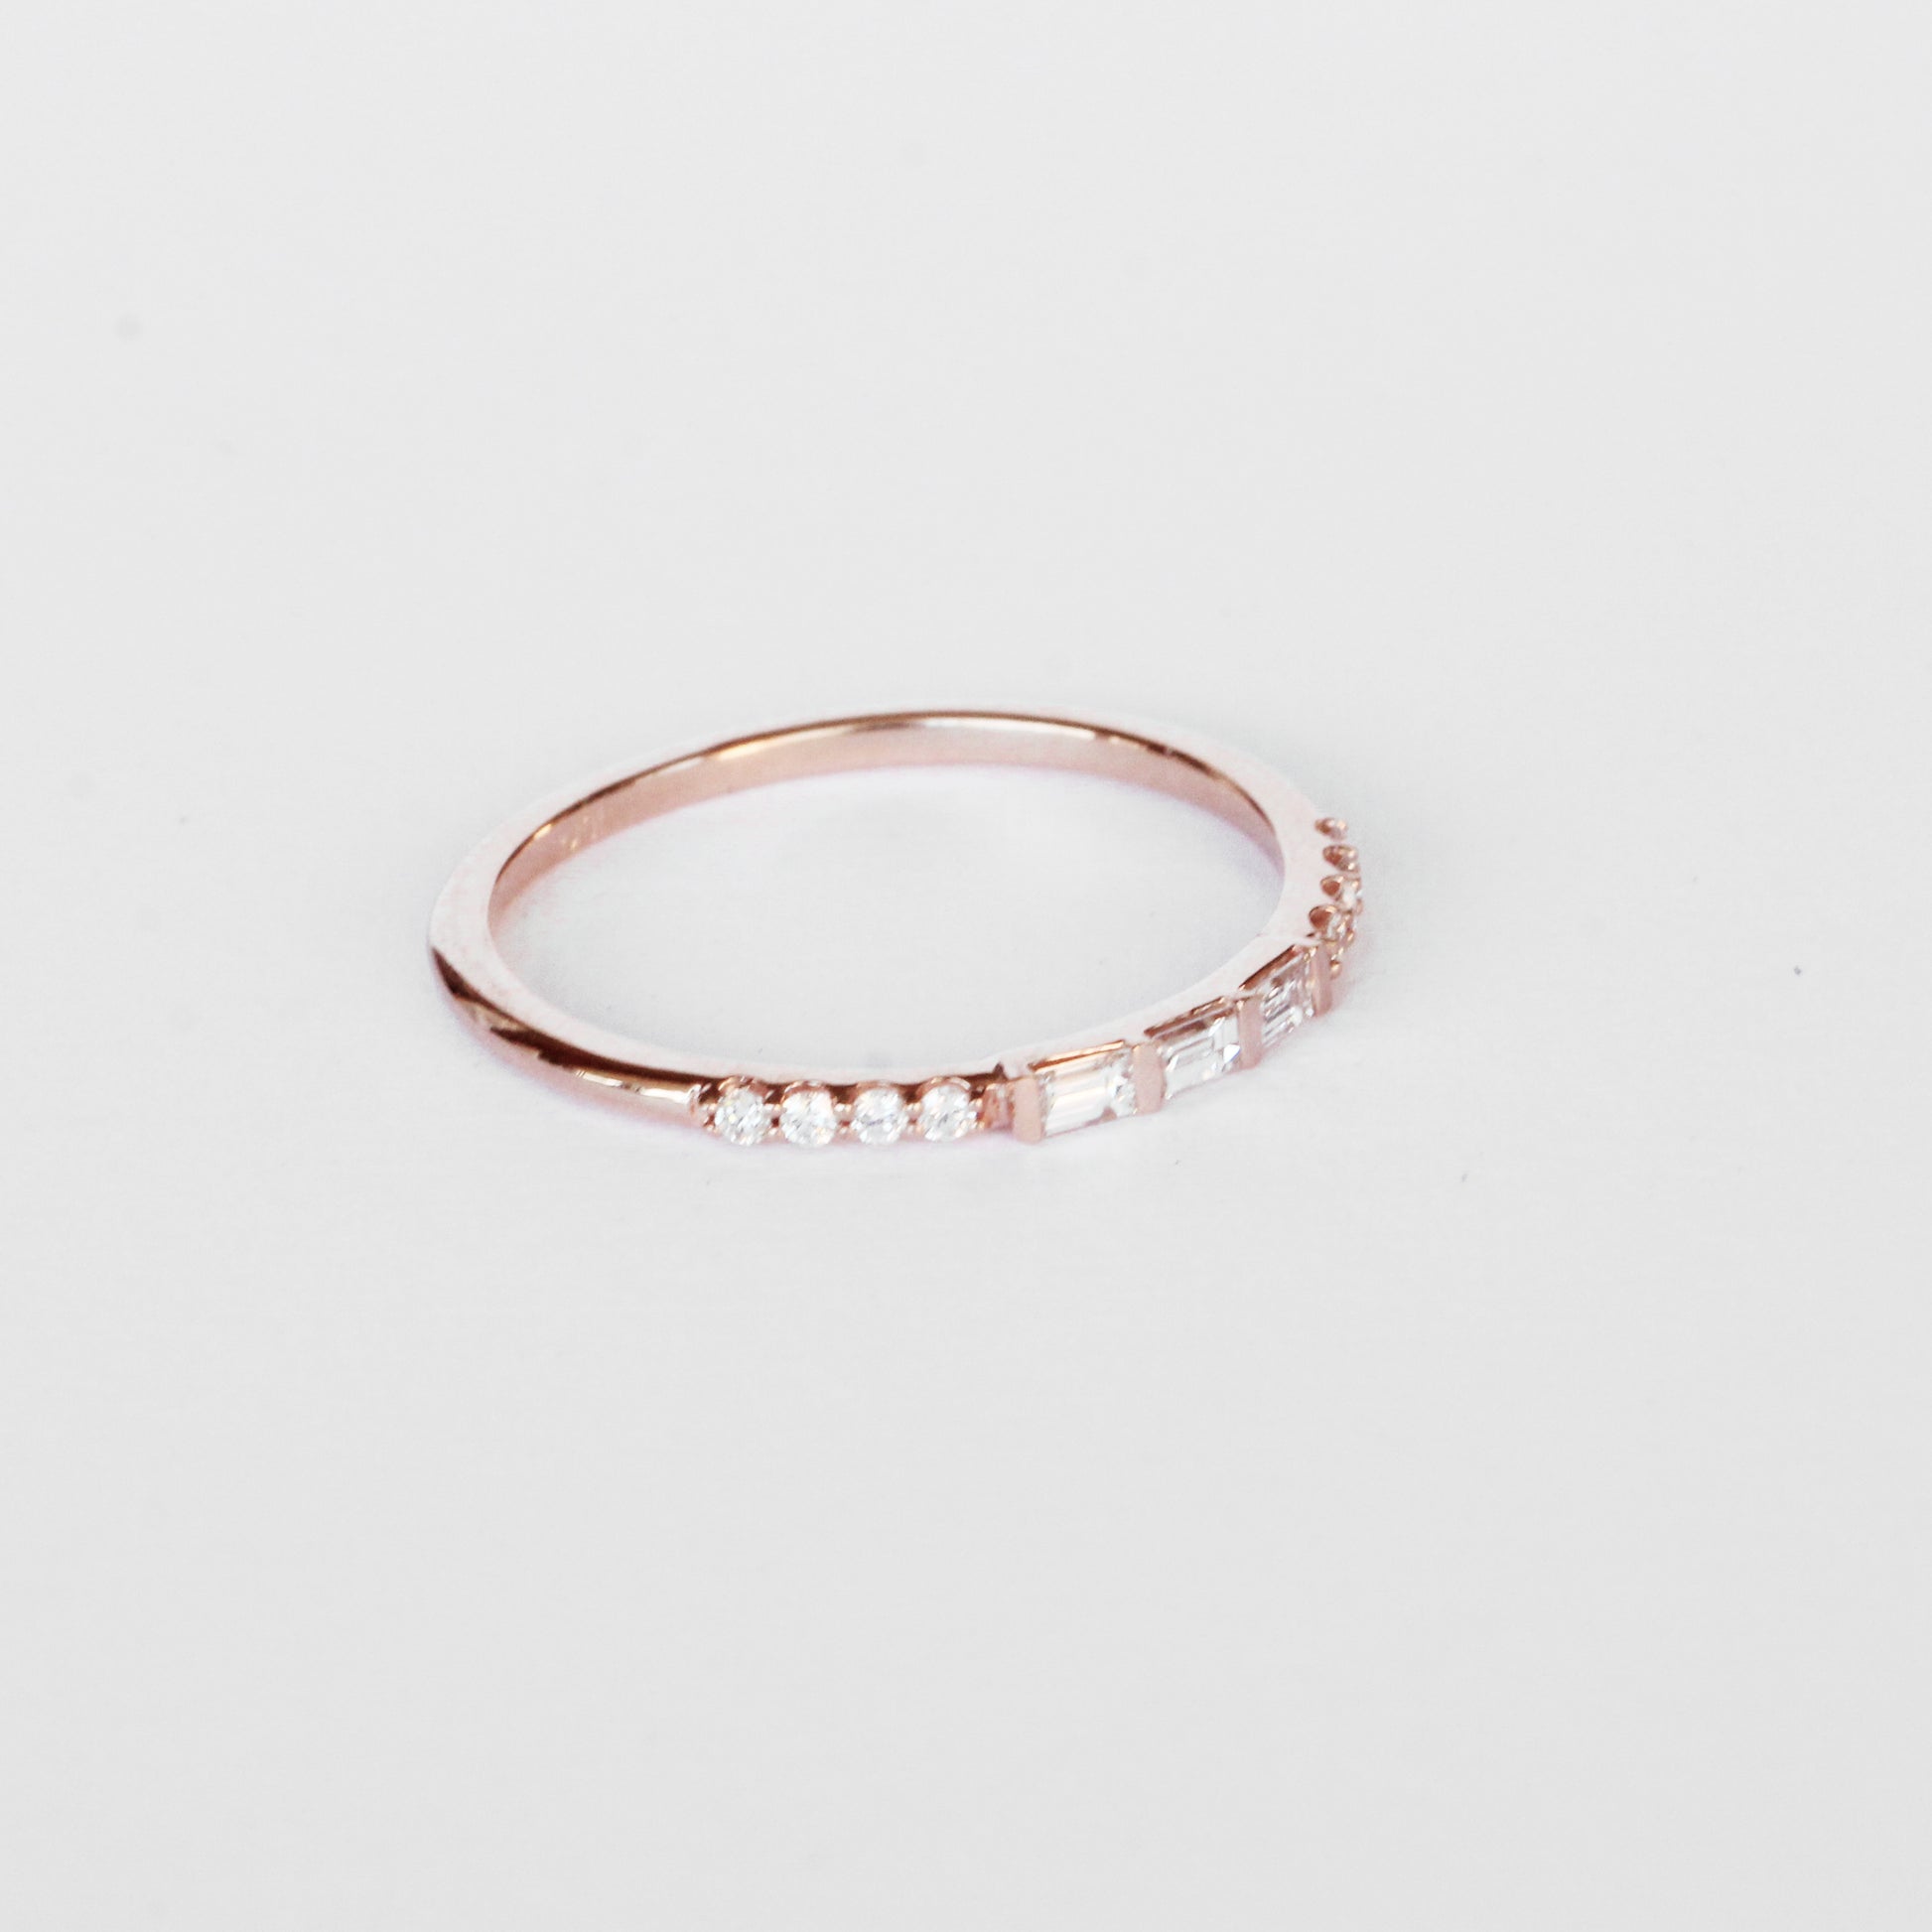 Primrose Baguette Band Stackable Ring in Your Choice of 14k Gold - Midwinter Co. Alternative Bridal Rings and Modern Fine Jewelry